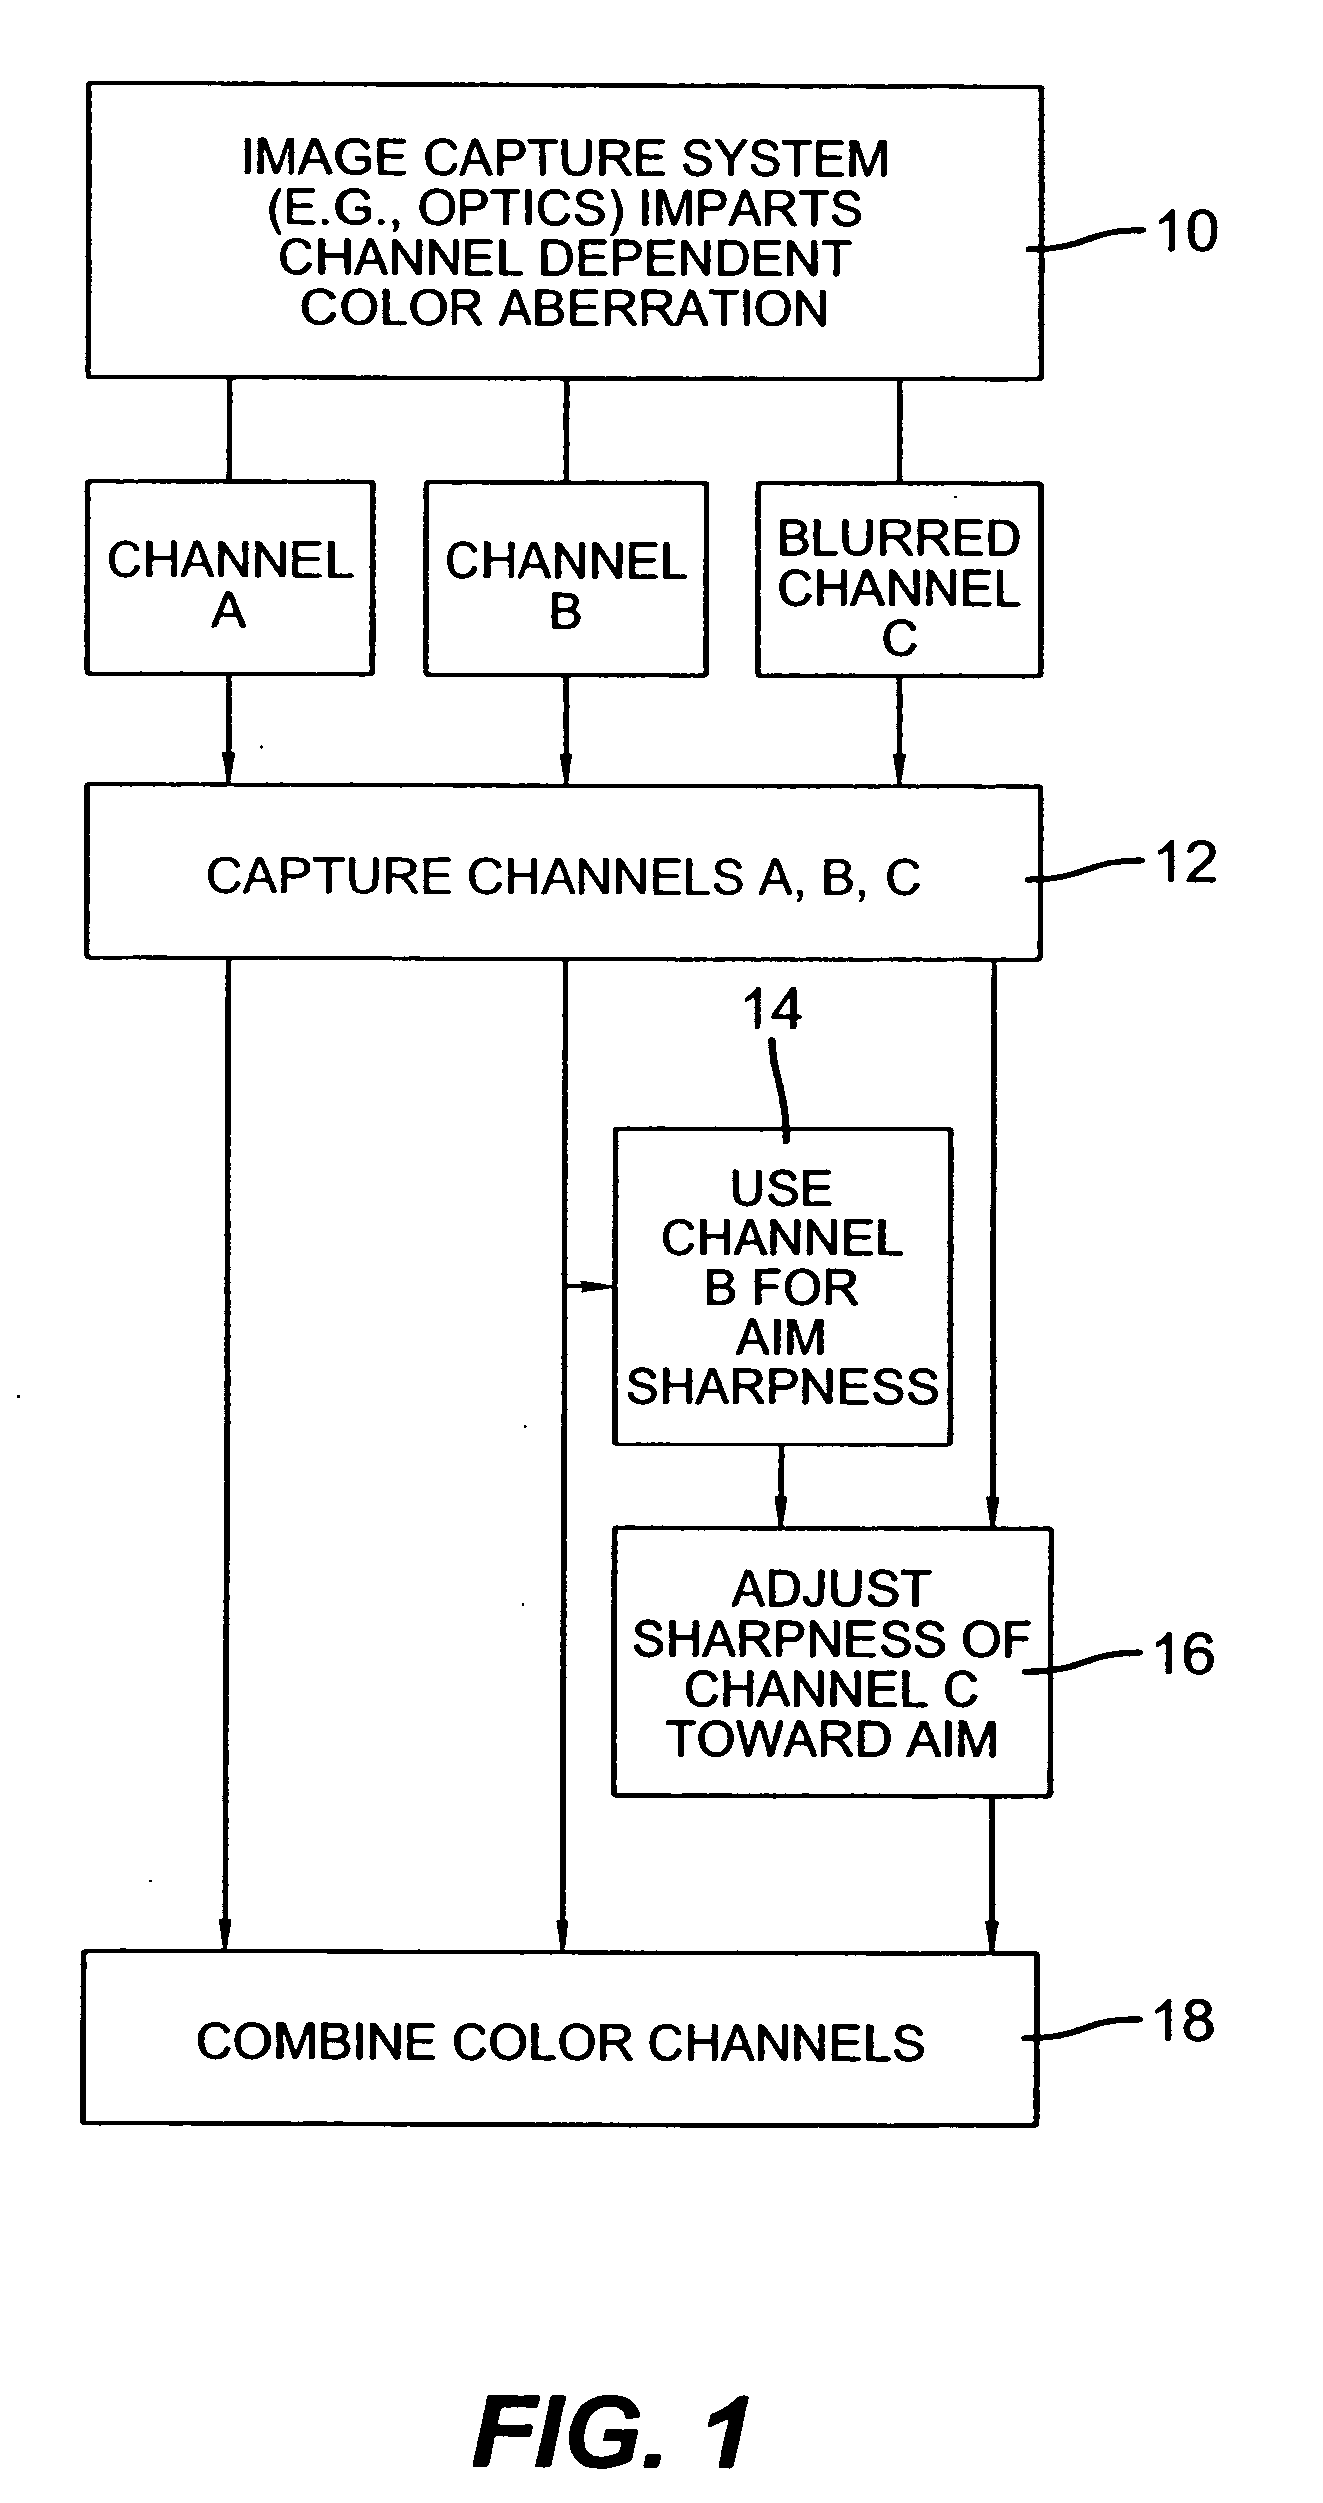 Method and apparatus for correcting a channel dependent color aberration in a digital image